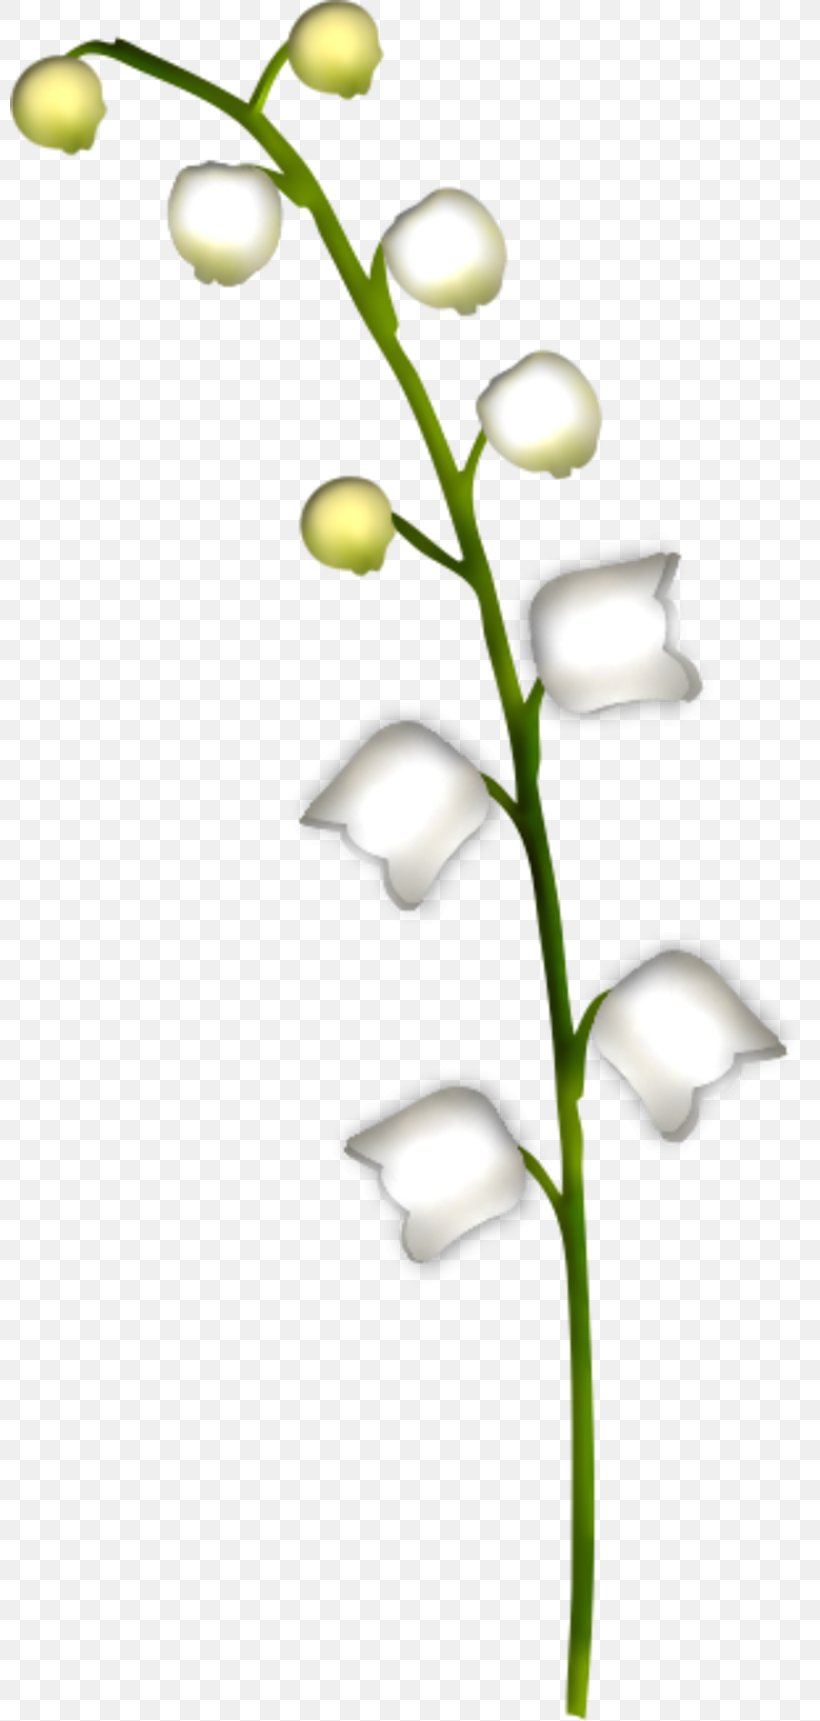 Lily Of The Valley Cut Flowers Plante Toxique Raceme, PNG, 800x1721px, Lily Of The Valley, Blume, Branch, Convallaria, Cut Flowers Download Free